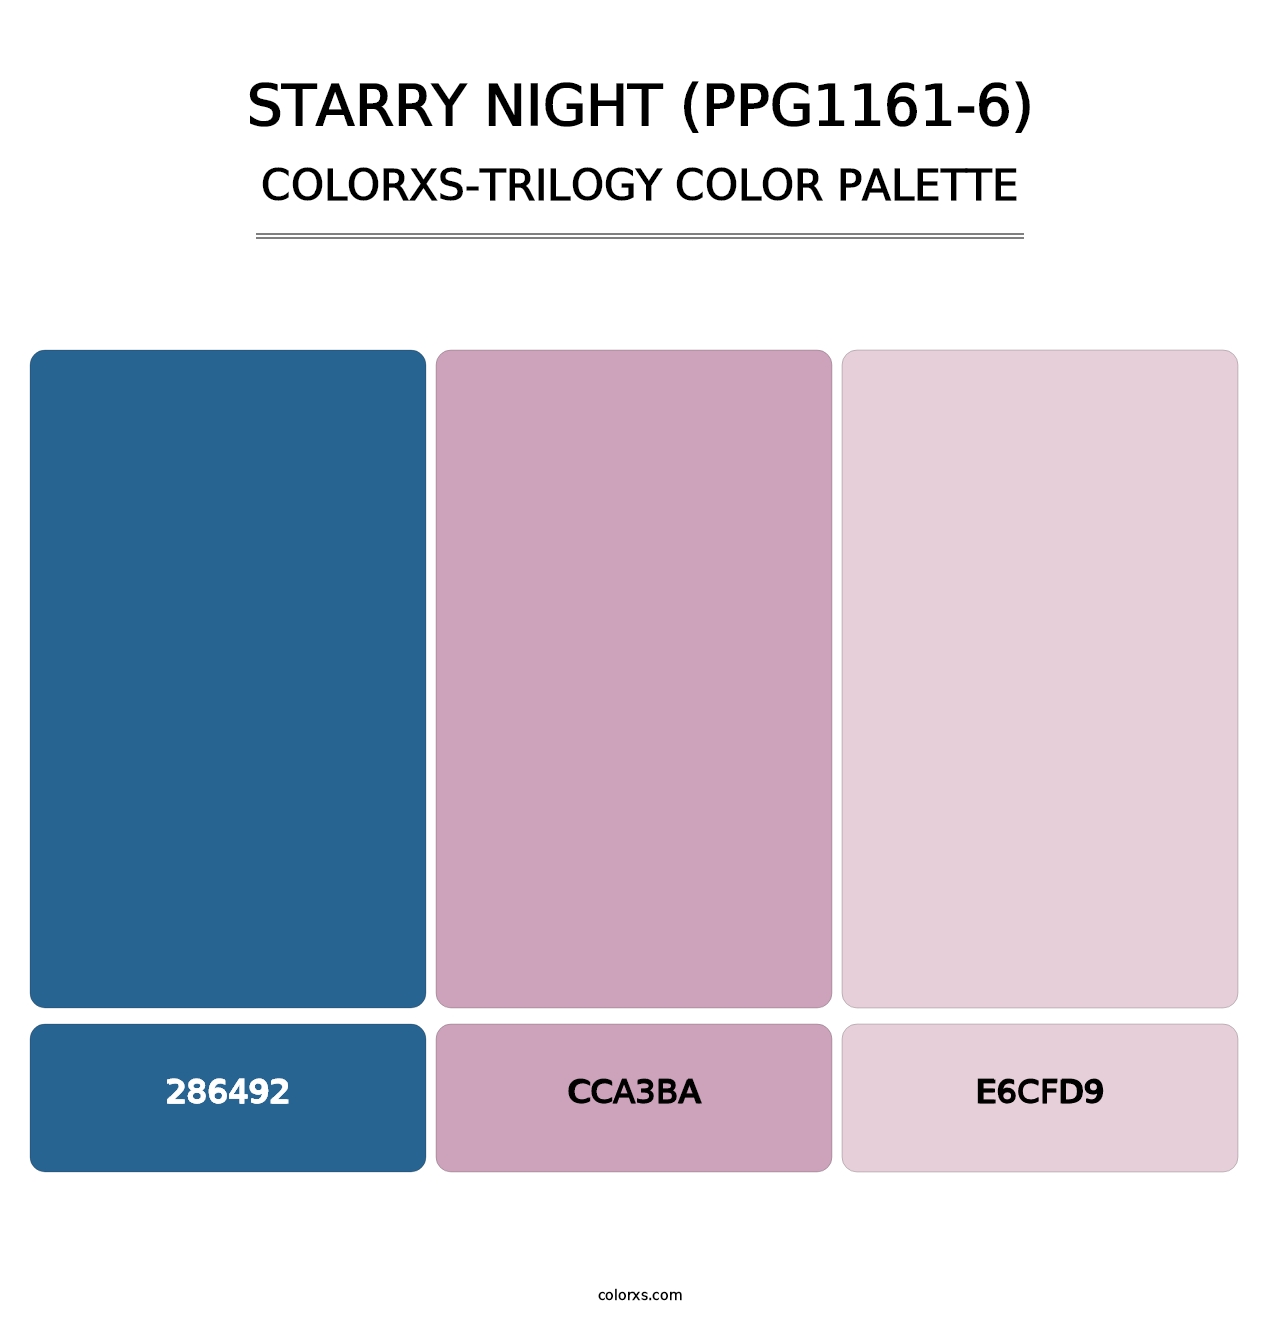 Starry Night (PPG1161-6) - Colorxs Trilogy Palette